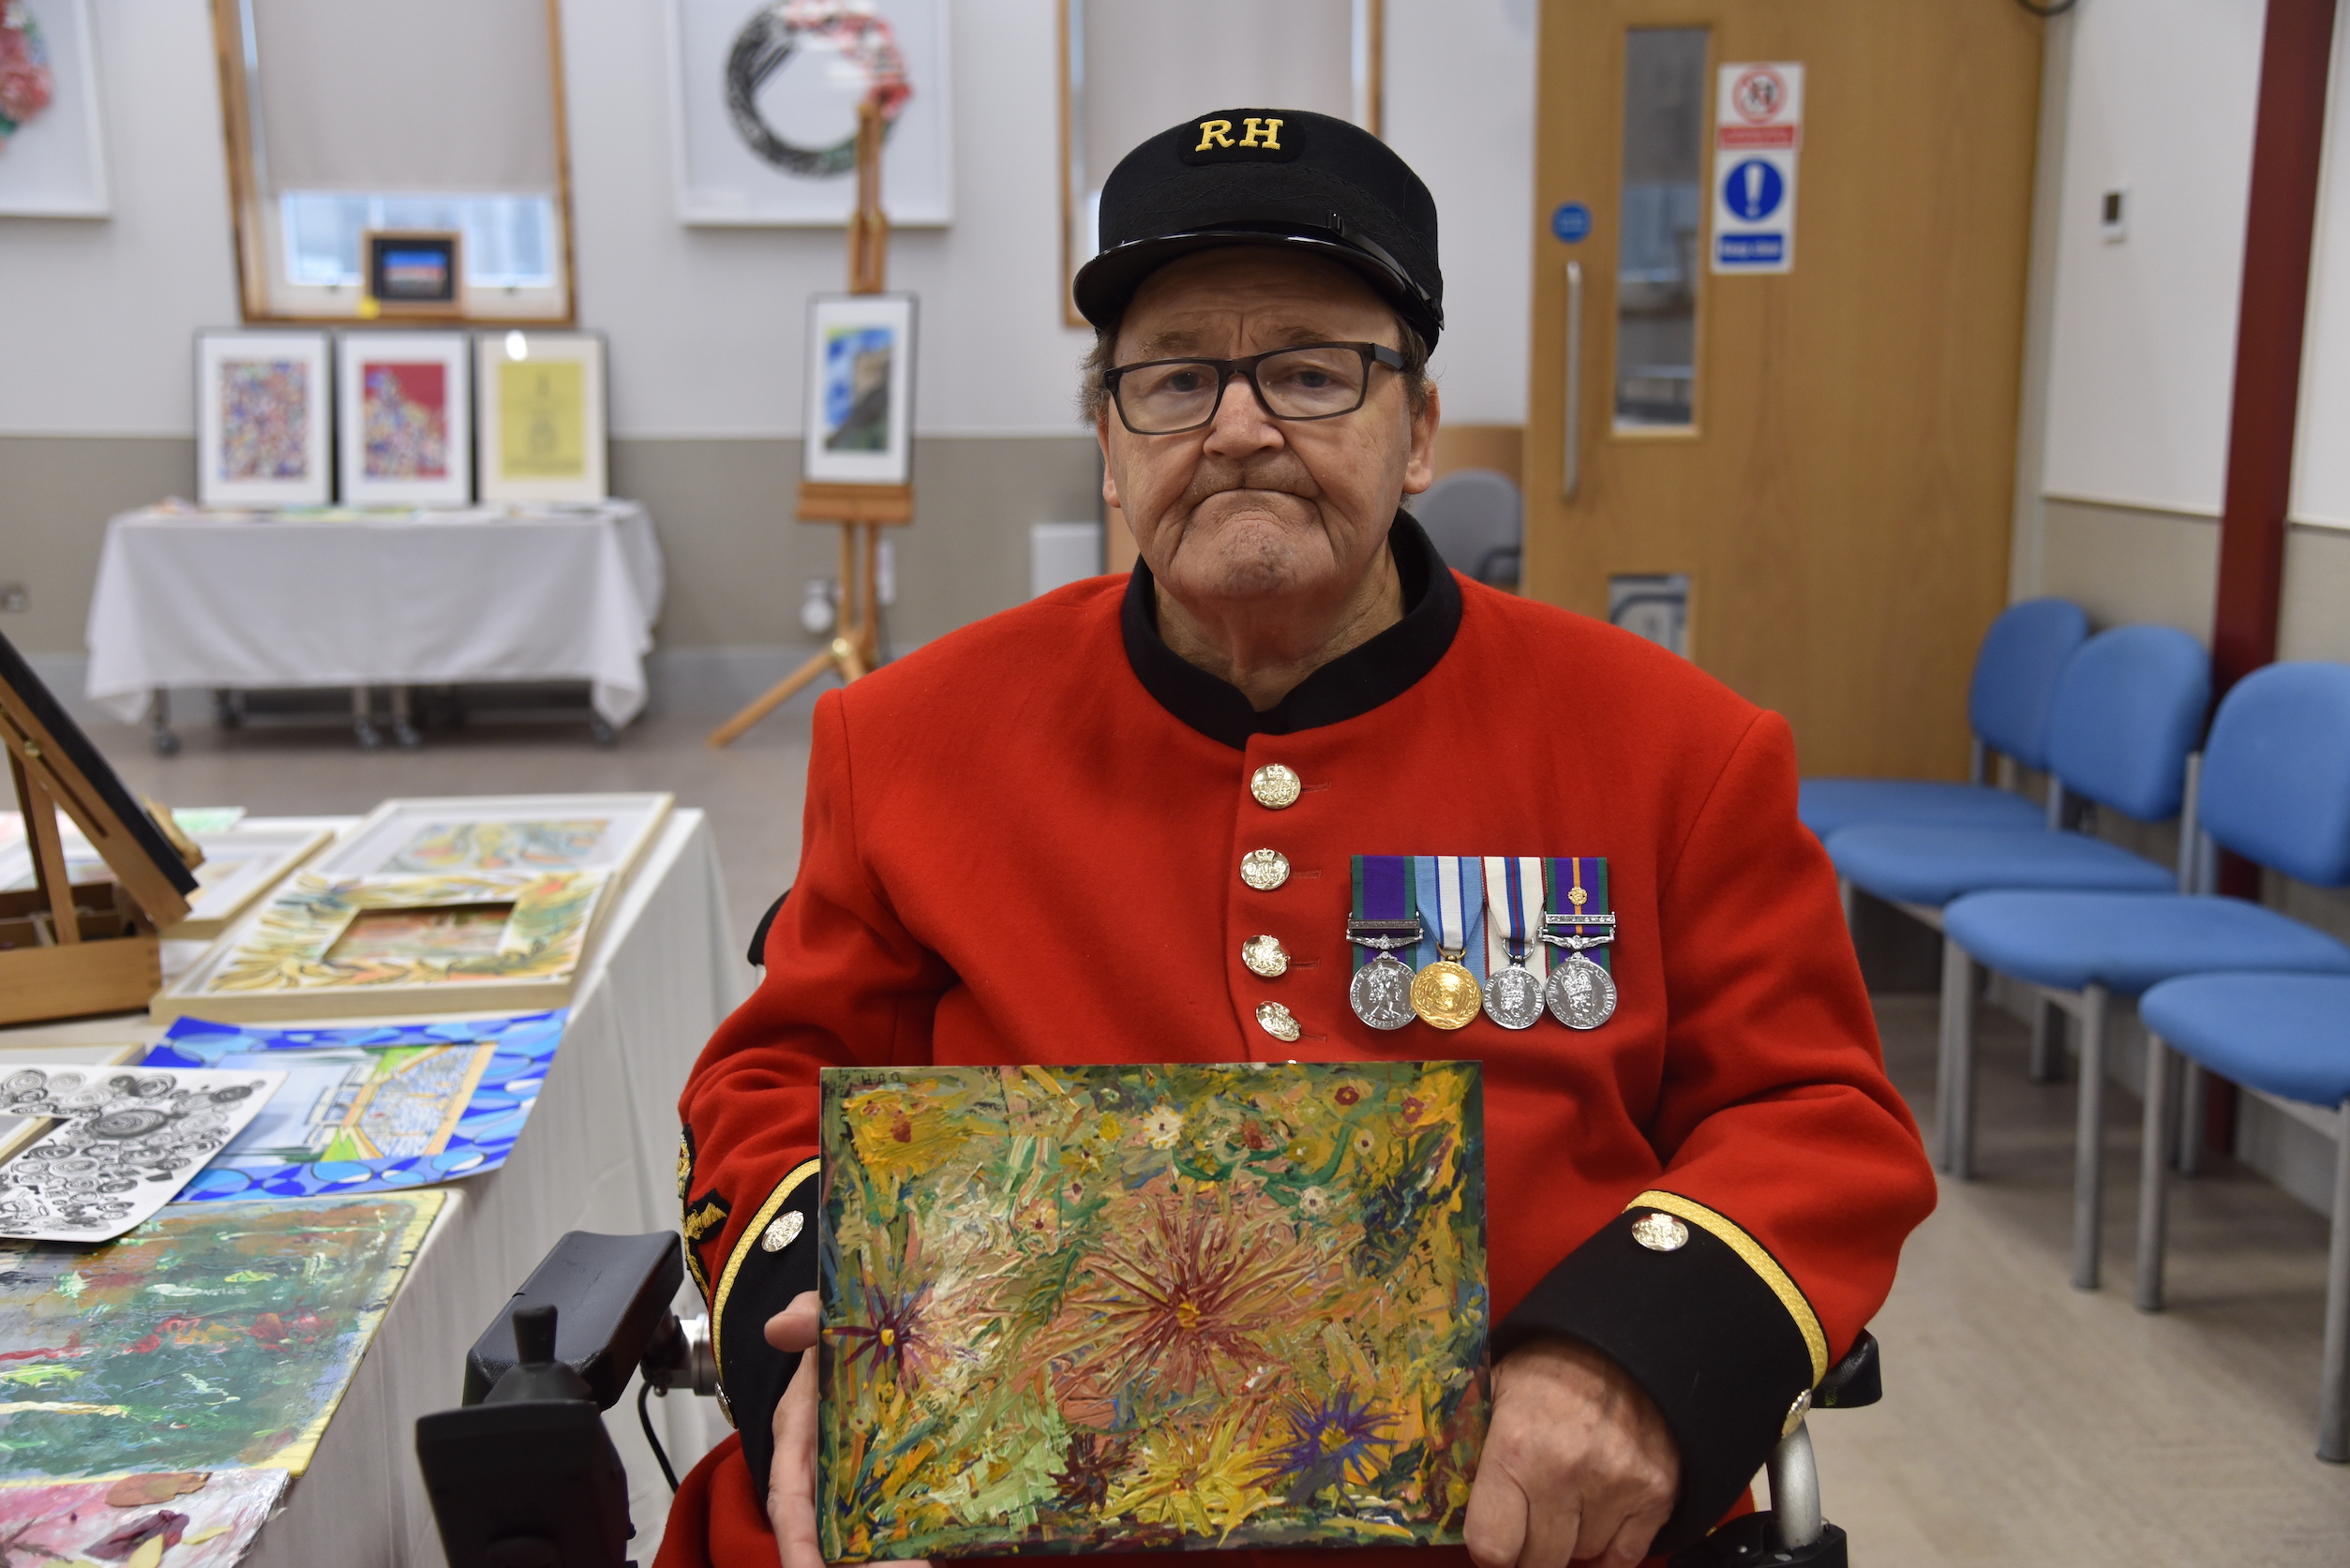 Chelsea Pensioner David Hinds holds his painting of a flower